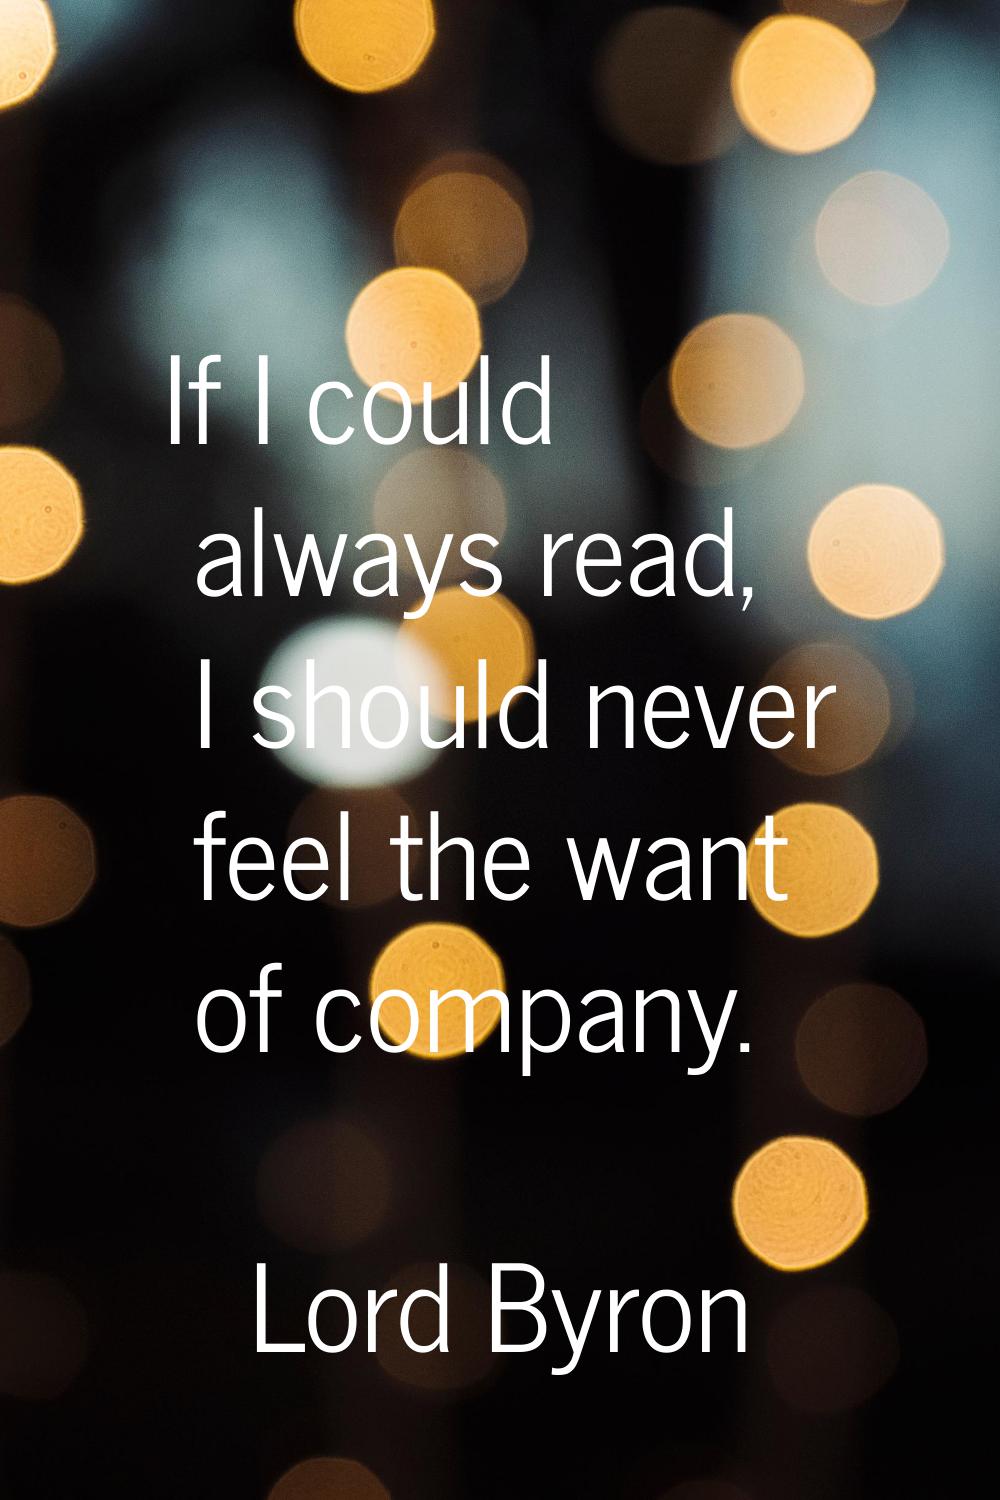 If I could always read, I should never feel the want of company.